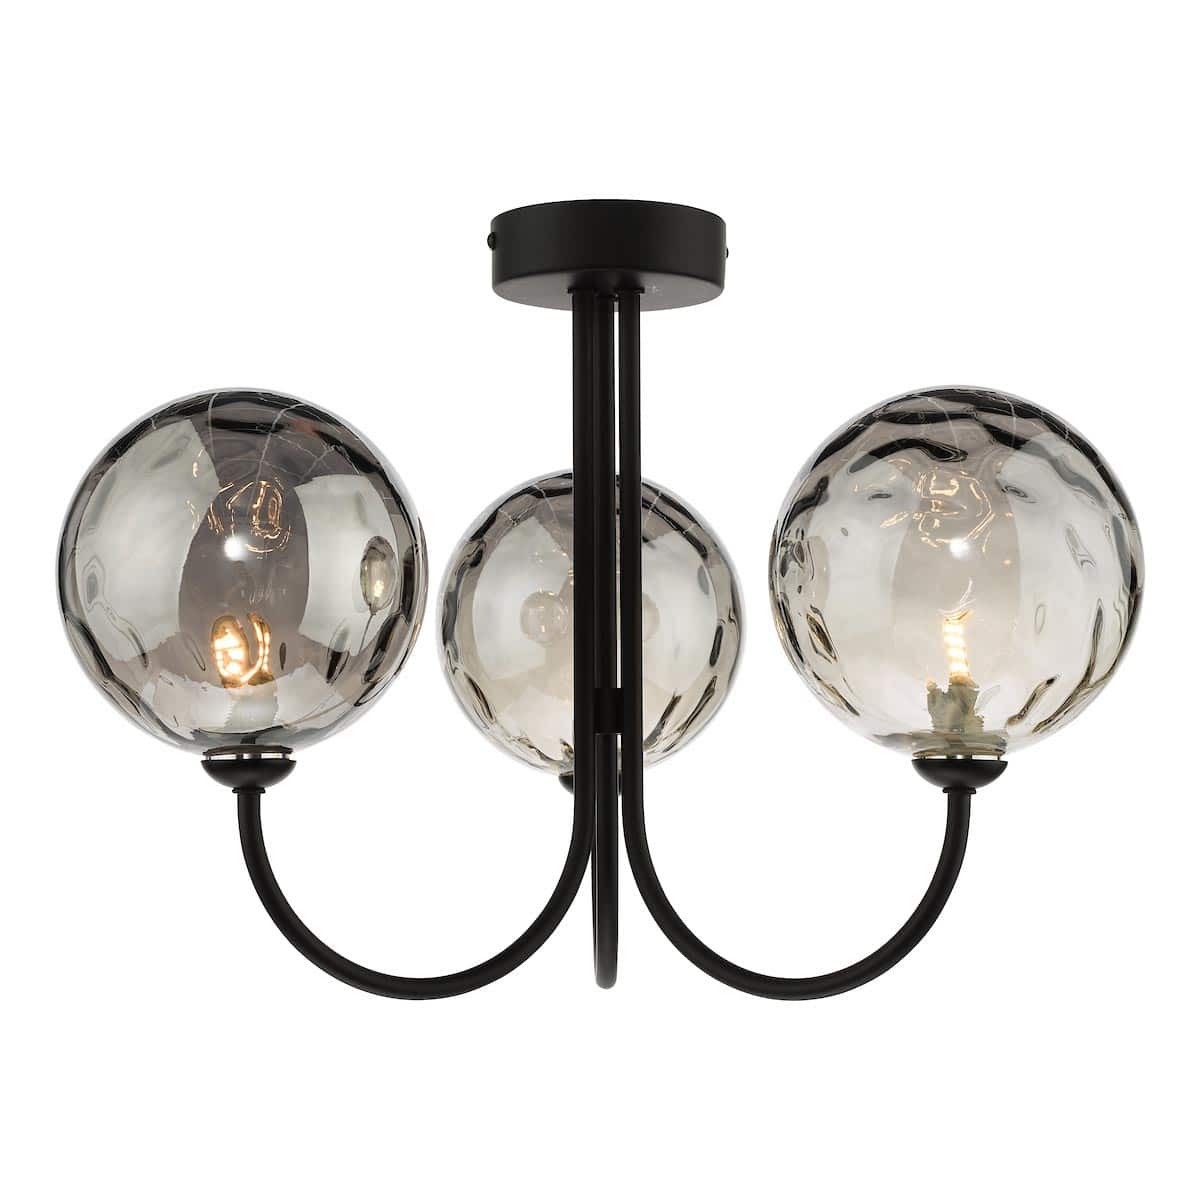 Dar Jared 3 Arm Low Ceiling Light Black Smoked Dimpled Glass